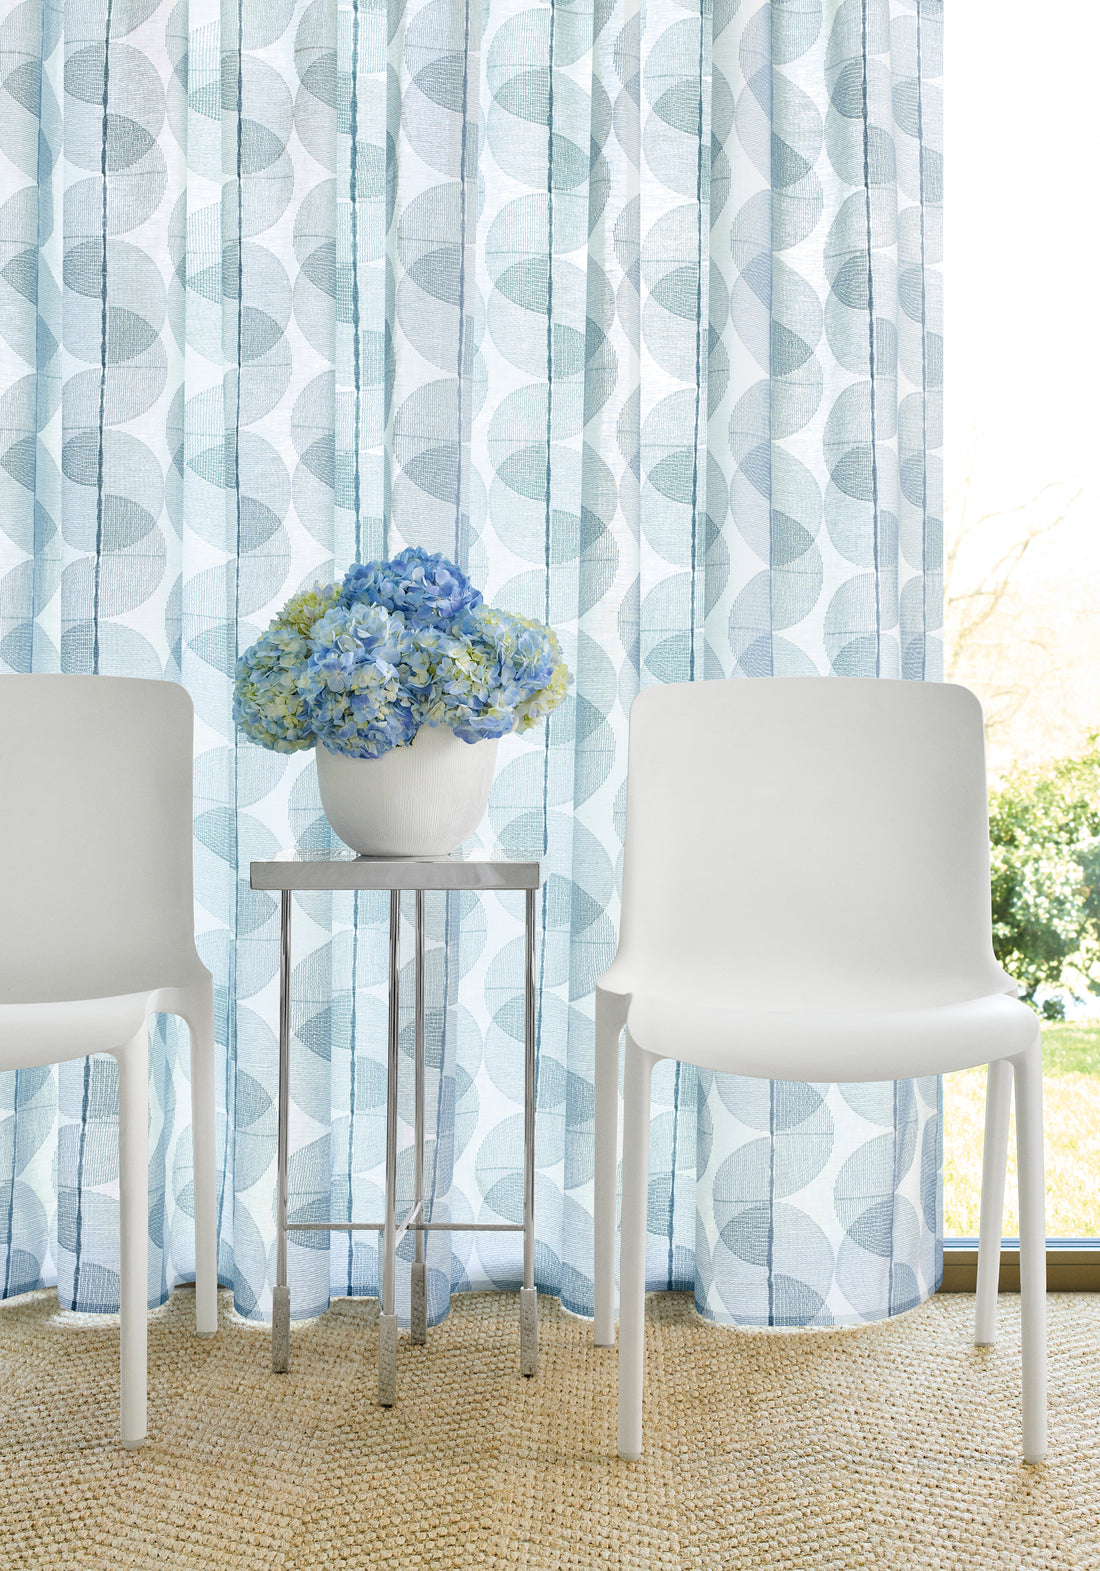 Sheer in Cyclone Embroidery fabric in ocean color - pattern number FWW8256 - by Thibaut in the Aura collection